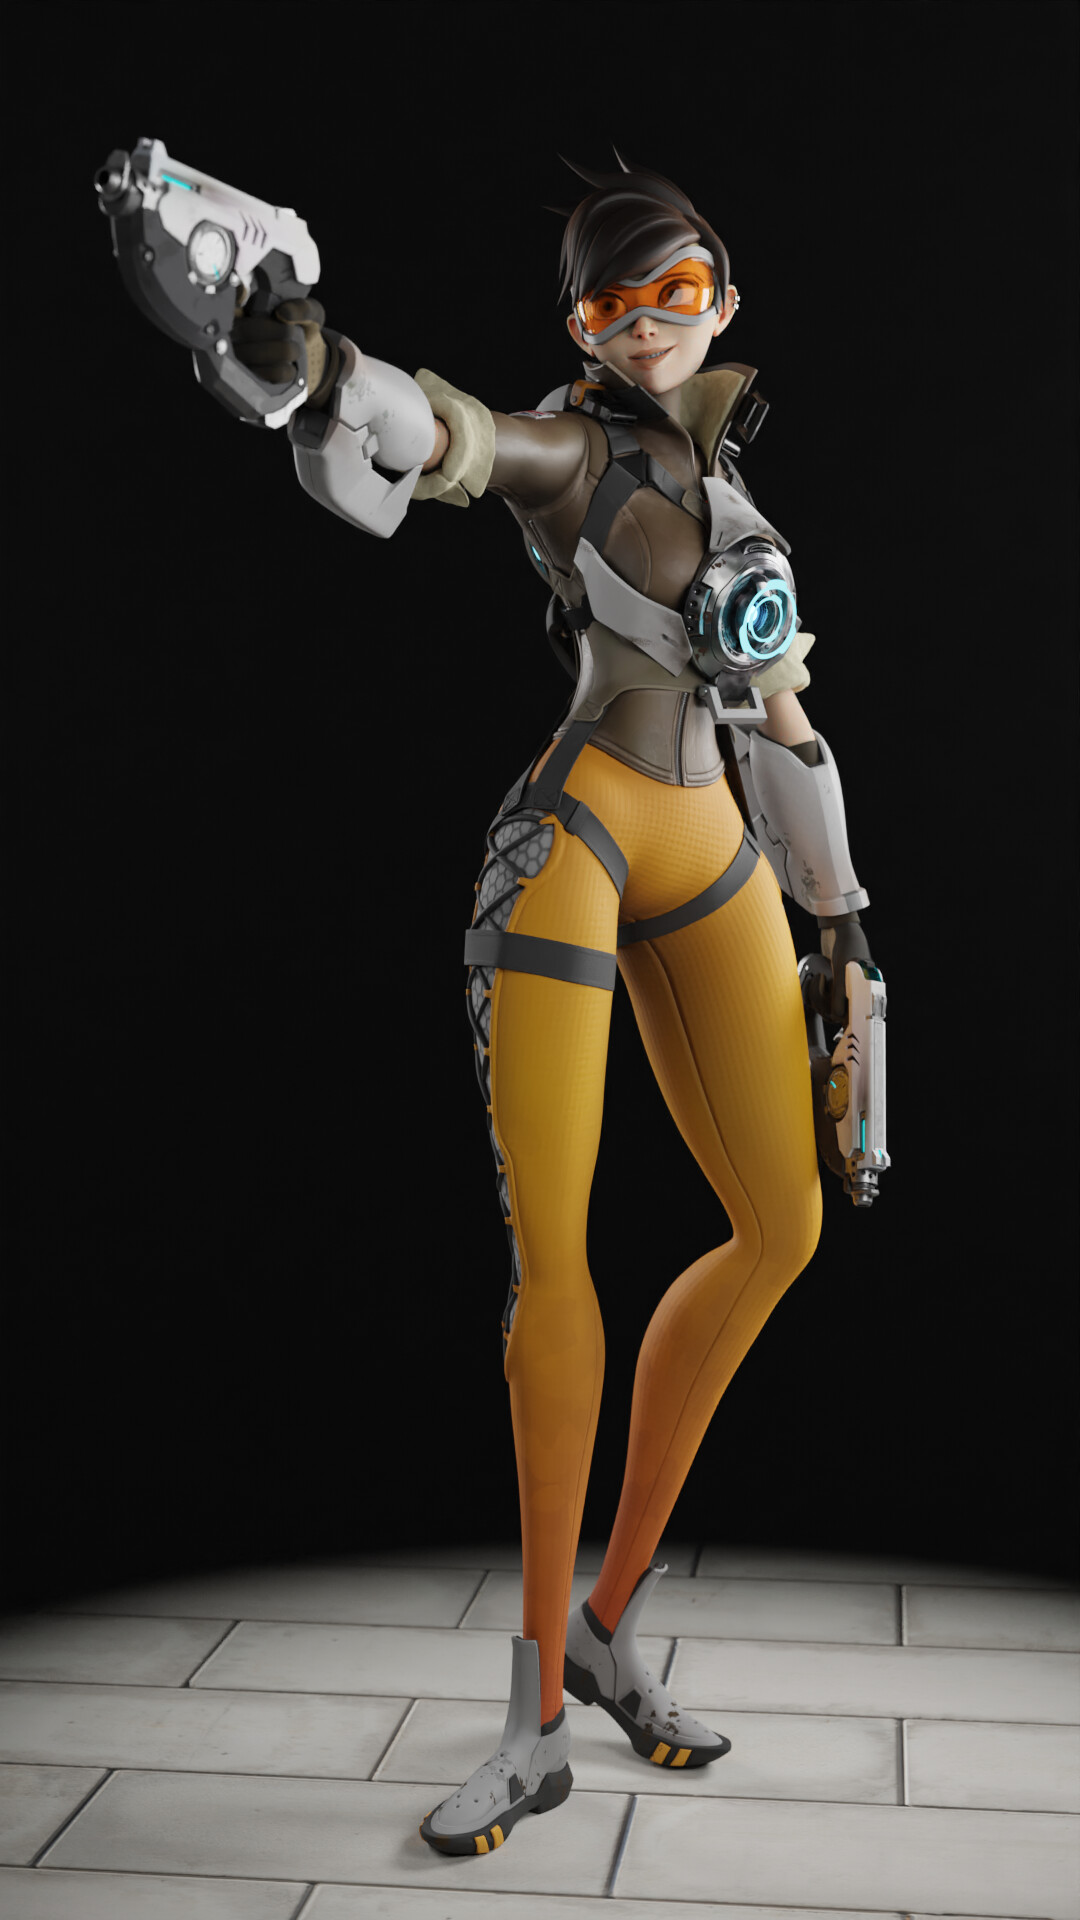 Tracer (Overwatch Fanart) - WIPs - Forums - Cubebrush